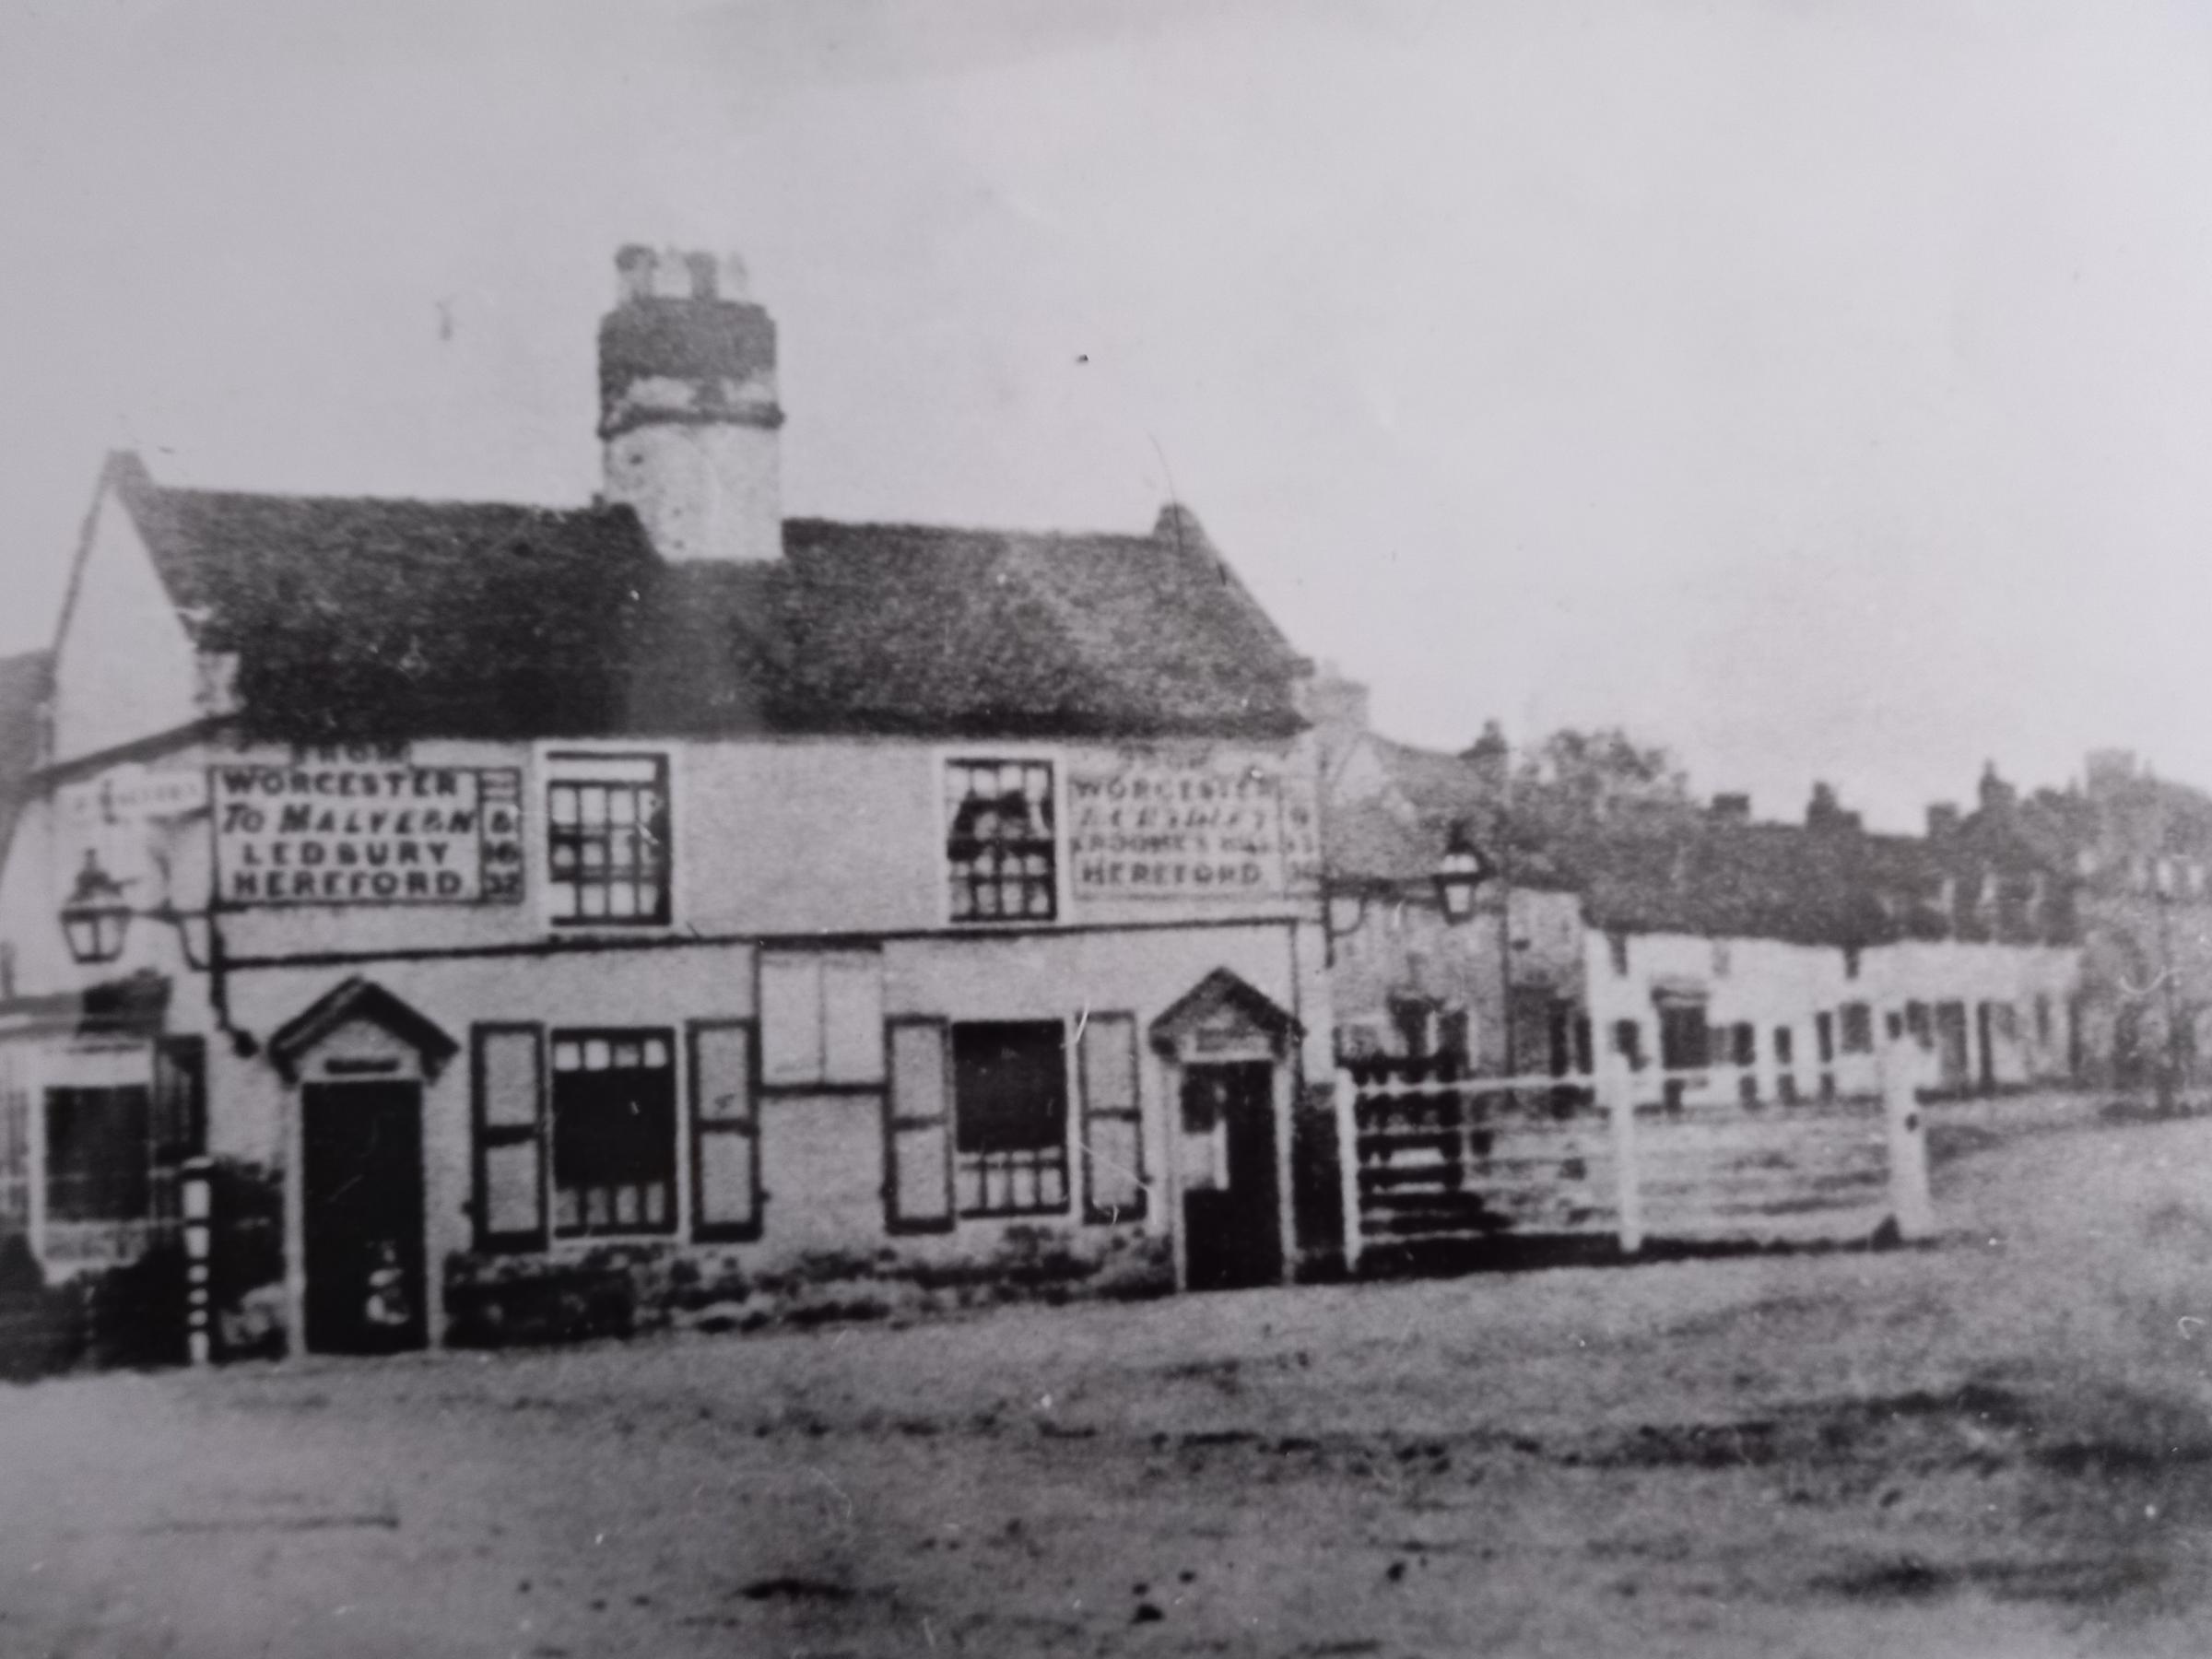 St John’s Toll House stood on the junction of Malvern Road and Bransford Road